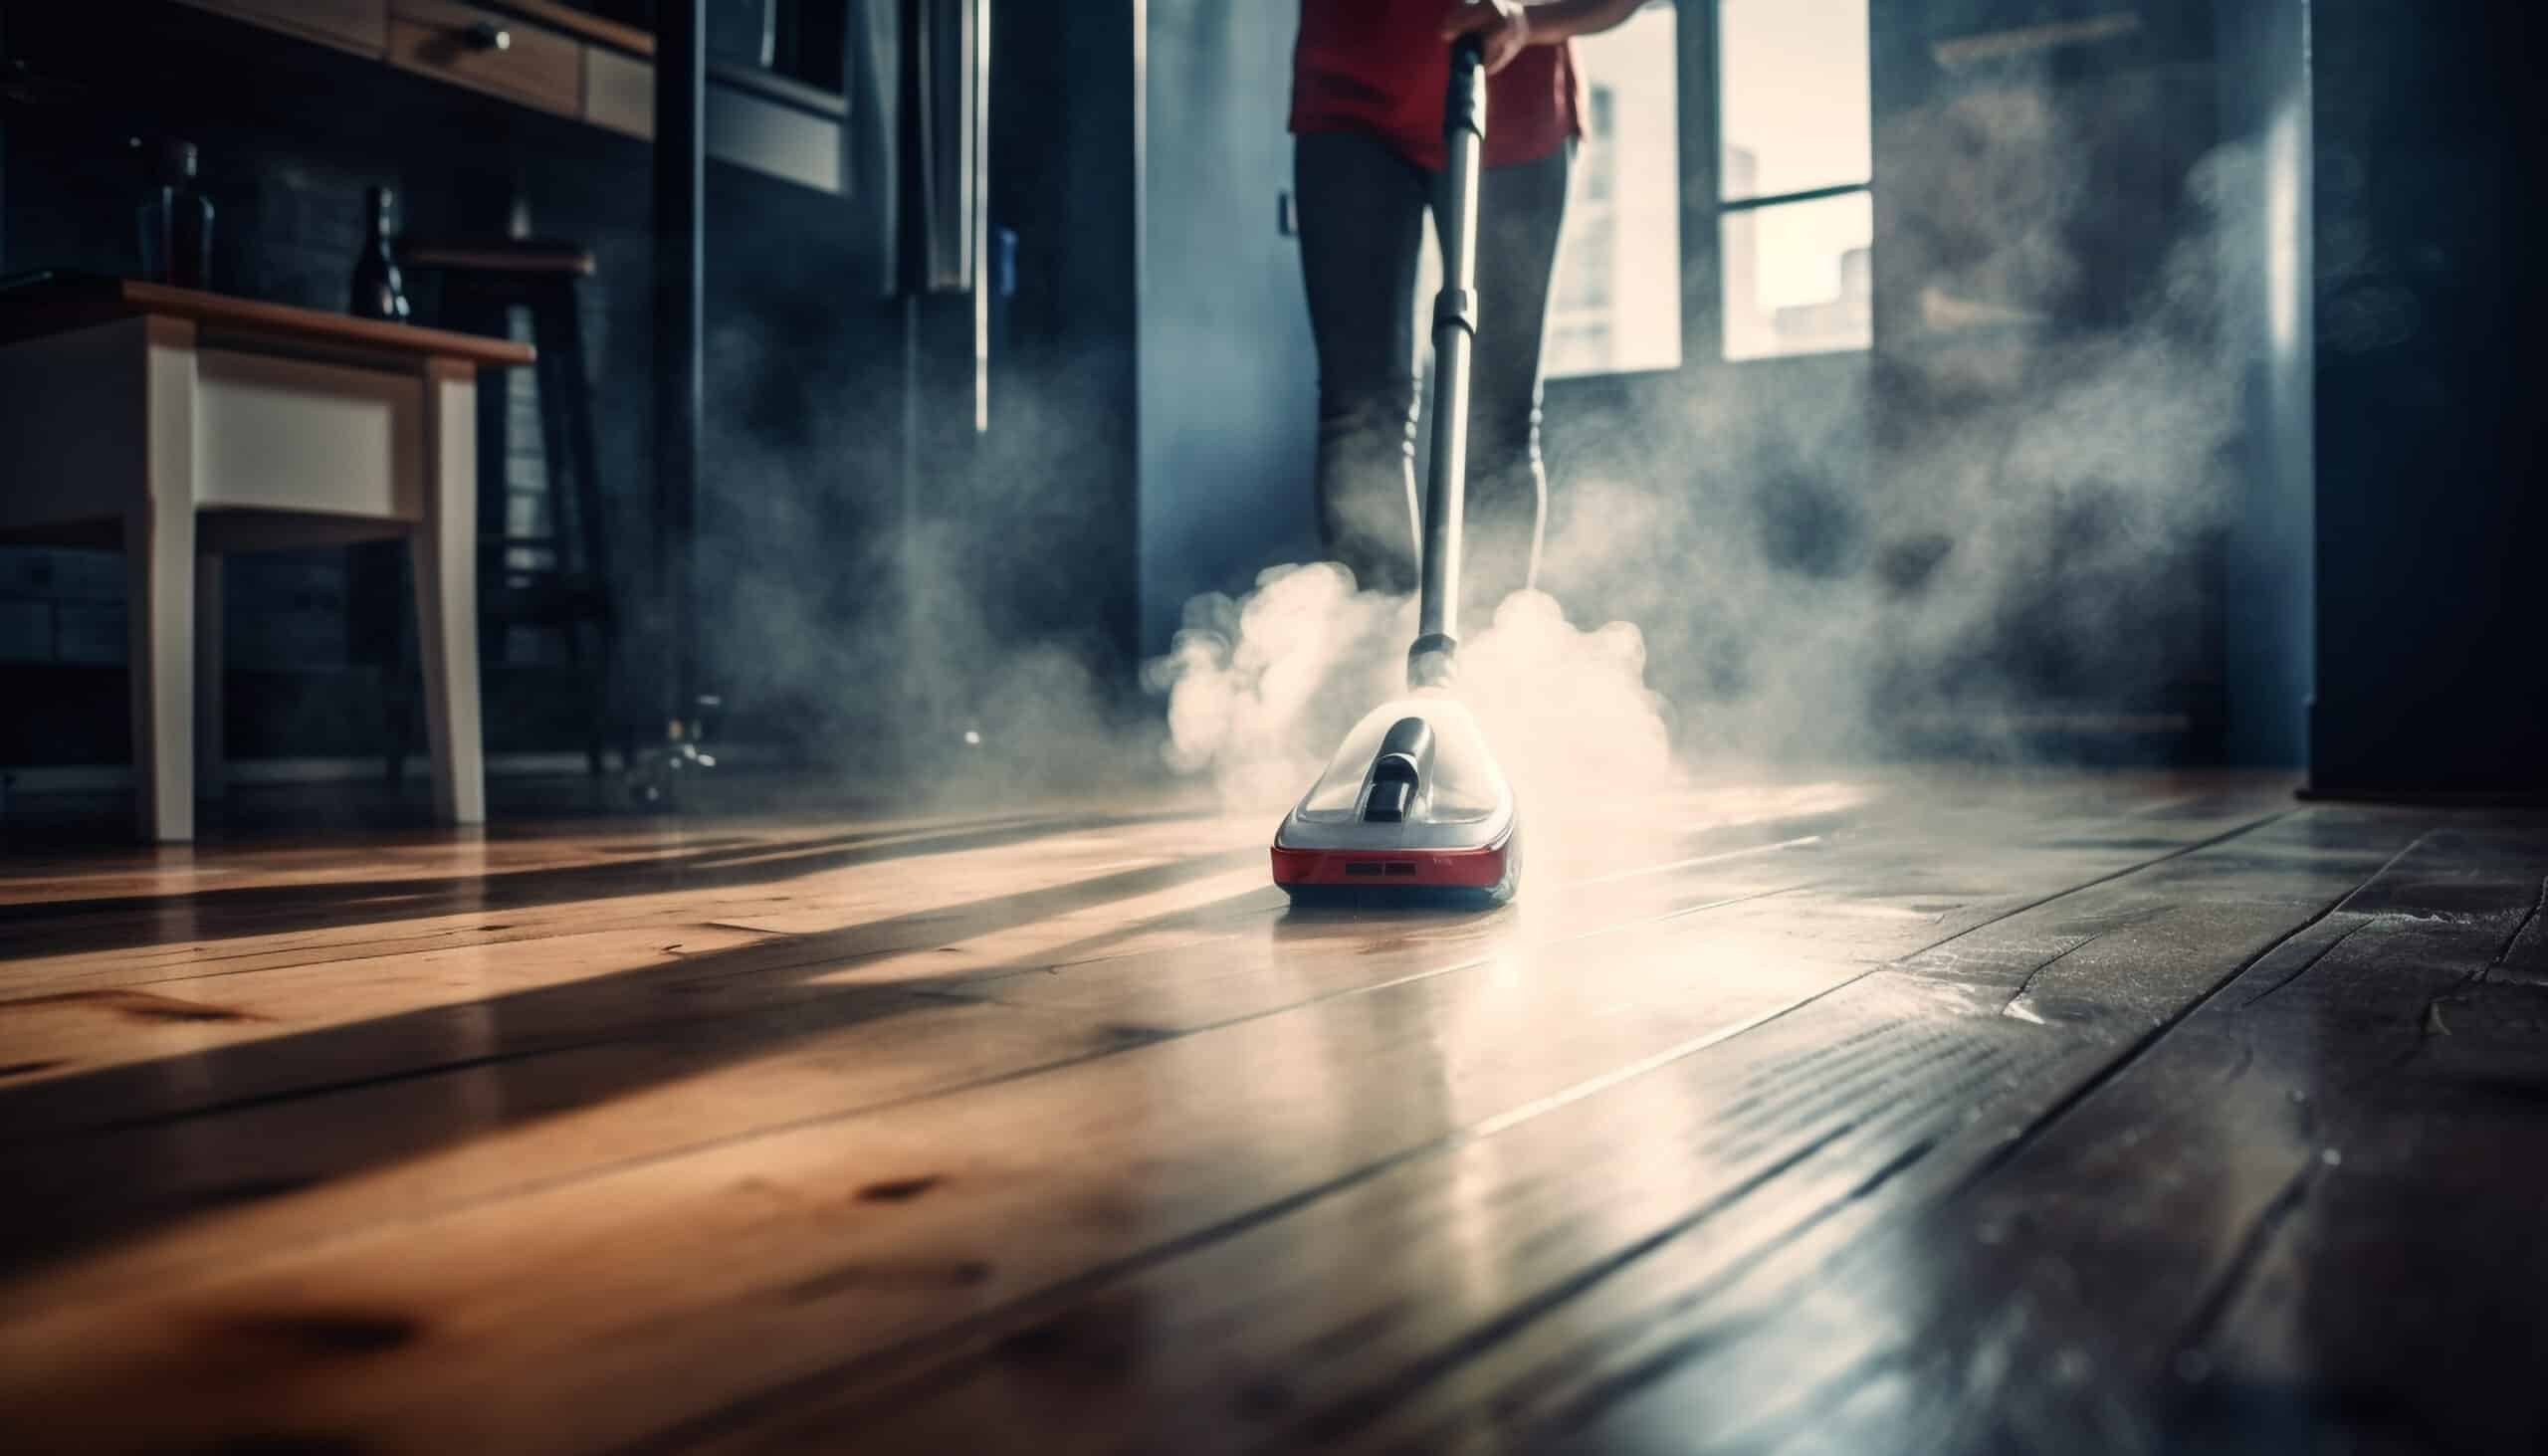 www.appr.com : What precautions should I take when using a steam cleaner around electrical outlets and appliances?